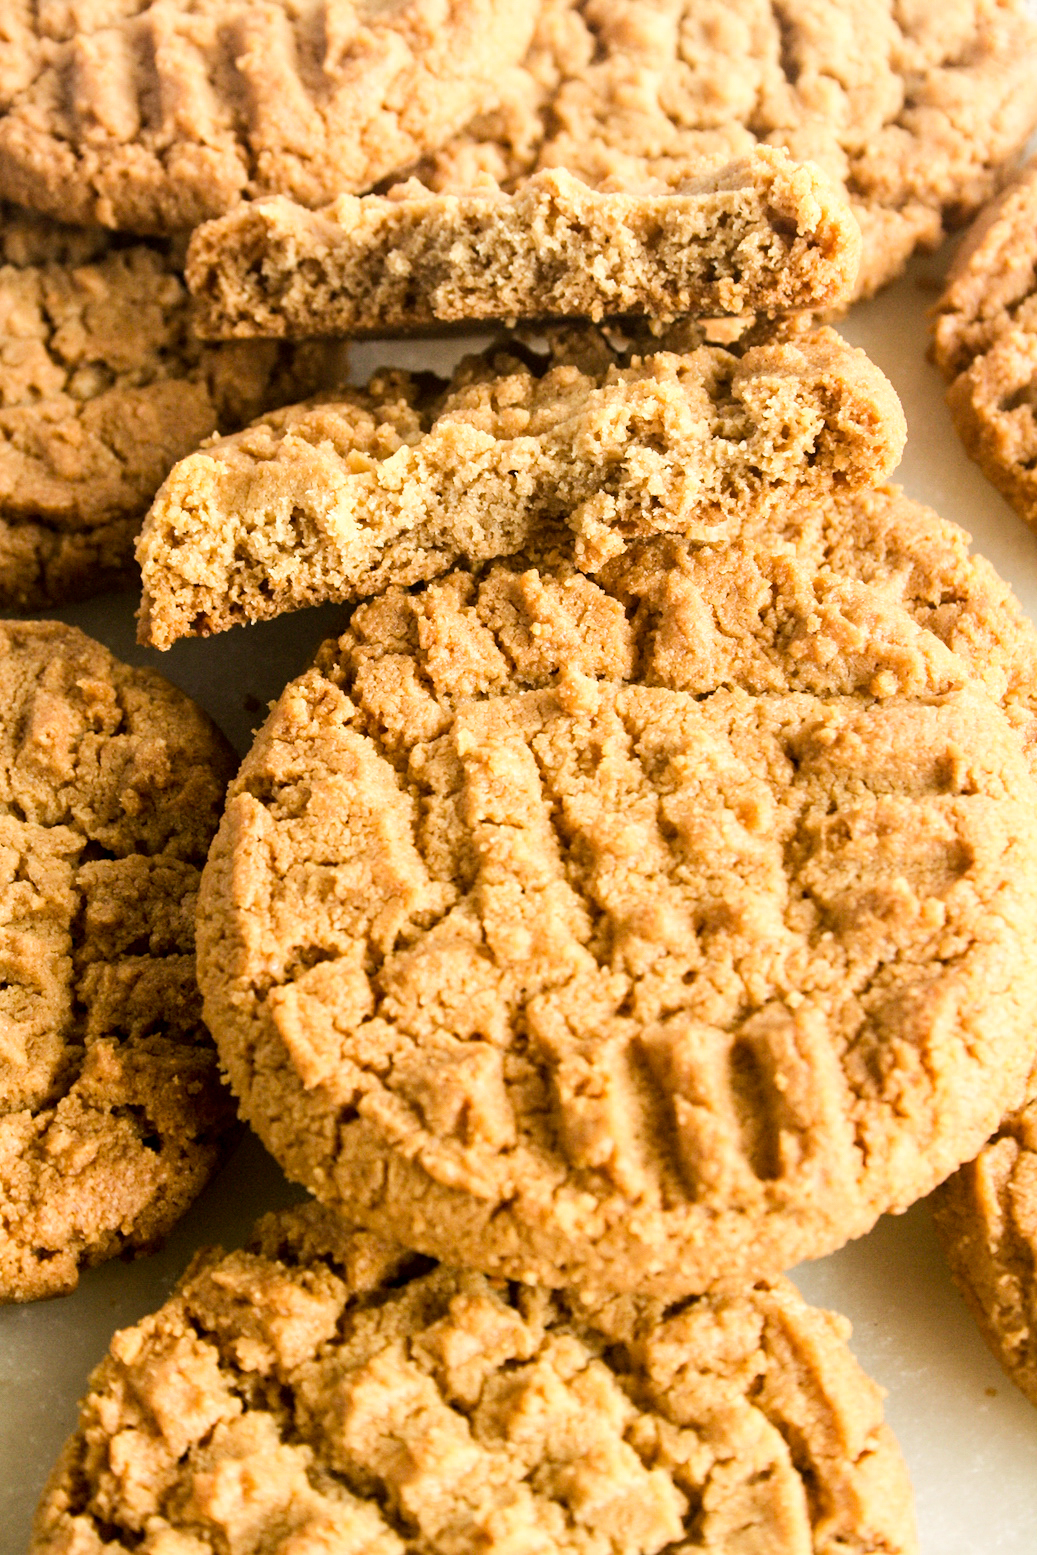 Super quick, chewy and slightly crunchy flourless peanut butter cookies